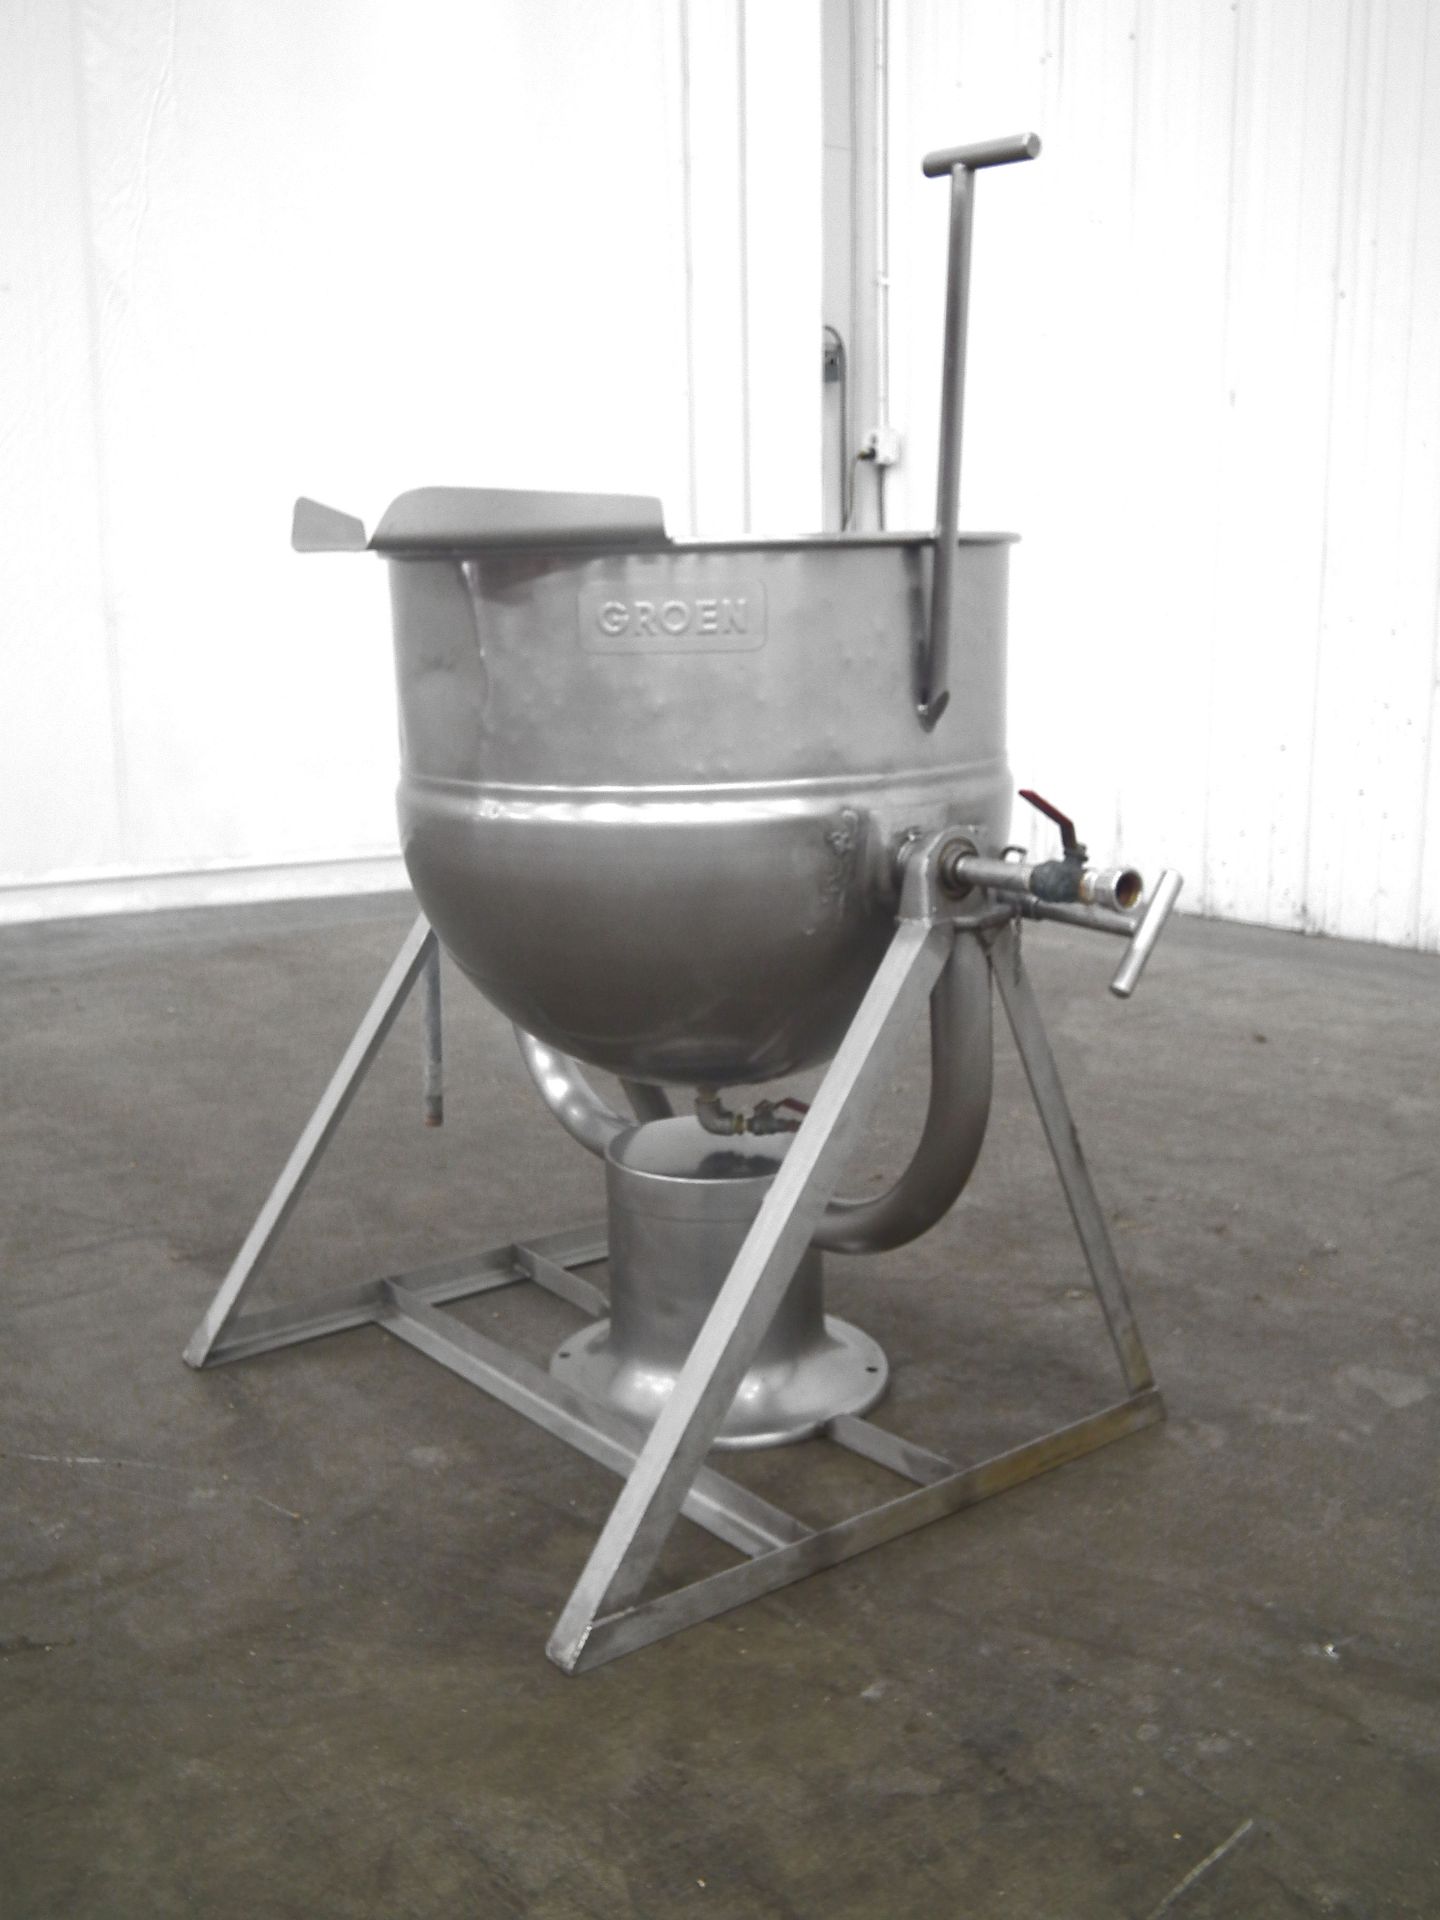 Groen 45 Gallon Jacketed Kettle B2219 - Image 2 of 6